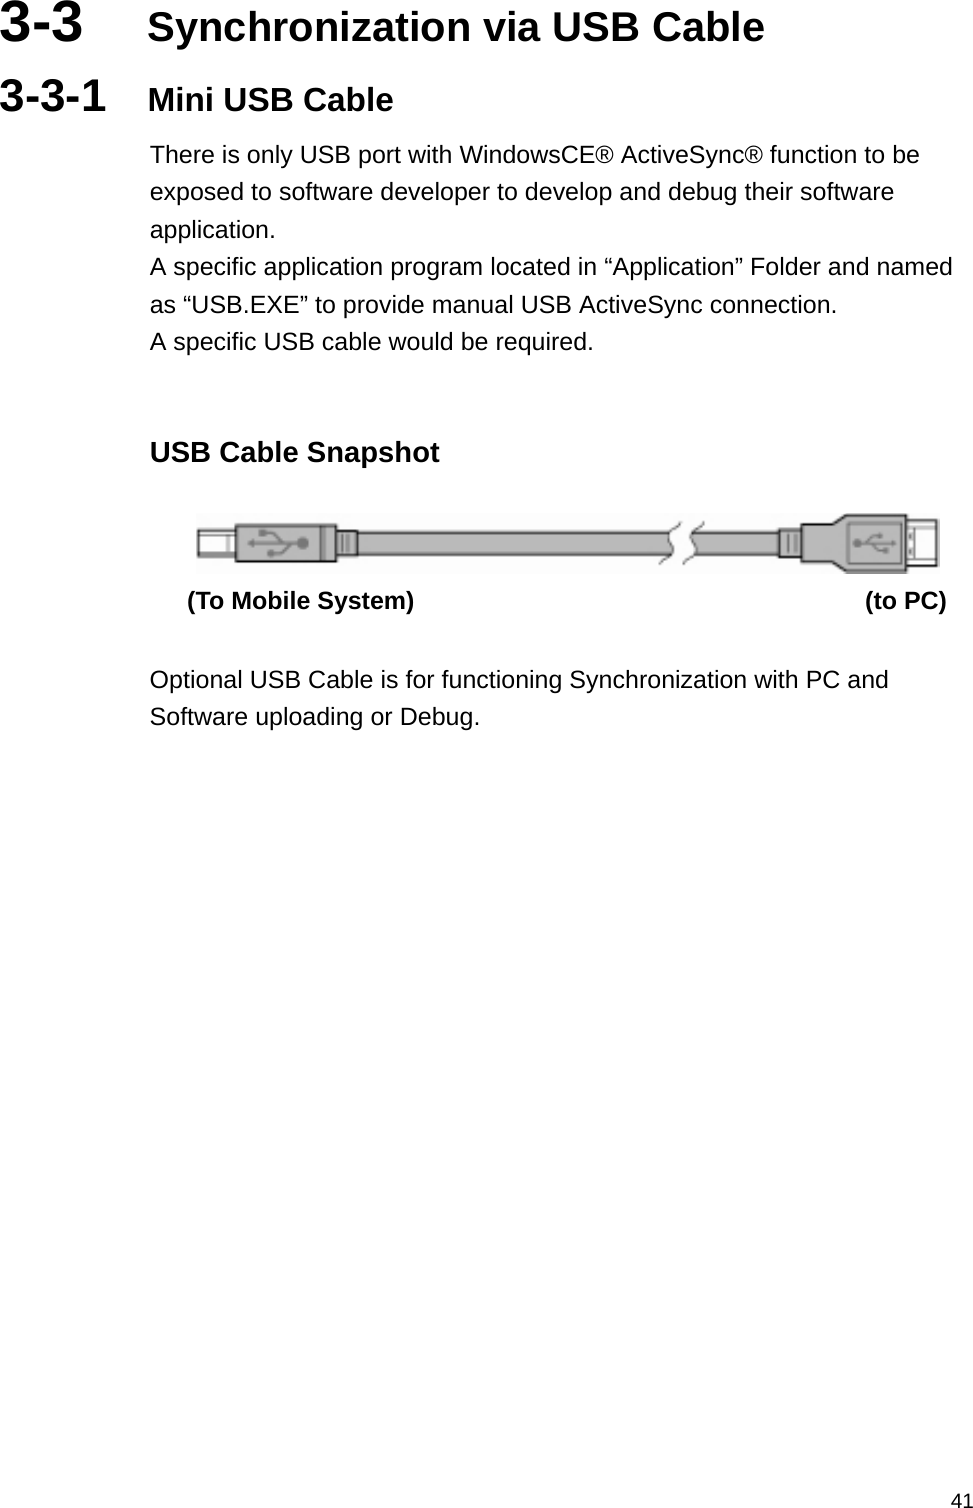   413-3  Synchronization via USB Cable 3-3-1  Mini USB Cable There is only USB port with WindowsCE® ActiveSync® function to be exposed to software developer to develop and debug their software application. A specific application program located in “Application” Folder and named as “USB.EXE” to provide manual USB ActiveSync connection. A specific USB cable would be required.  USB Cable Snapshot    (To Mobile System)                                    (to PC)  Optional USB Cable is for functioning Synchronization with PC and Software uploading or Debug.  